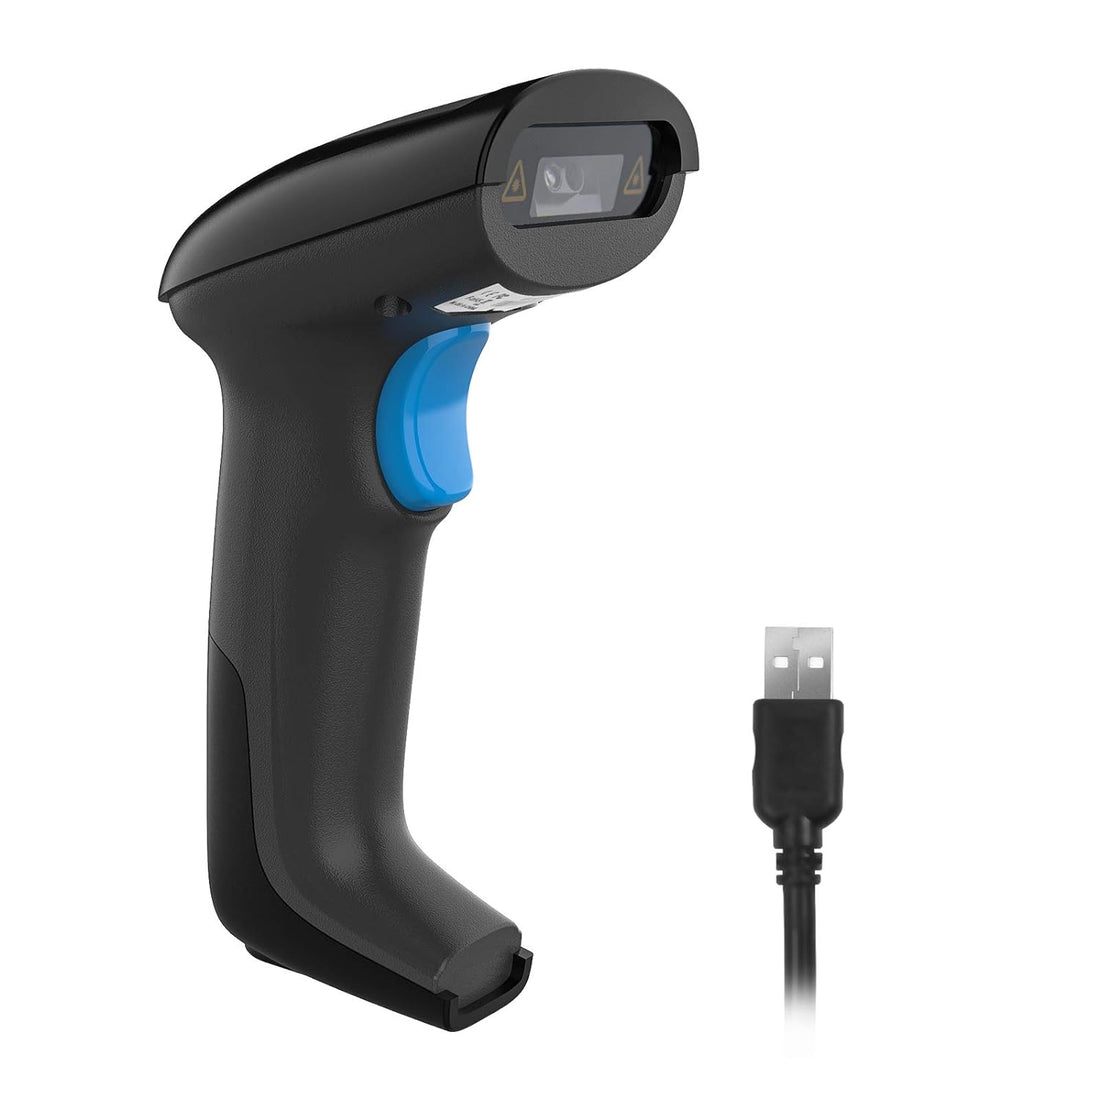 REALINN Handheld 2D Barcode Scanner QR PDF417 Data Matrix 1D Bar Code Scanner Wired Barcode Reader with USB Cable for Mobile Payment, Store, Supermarket